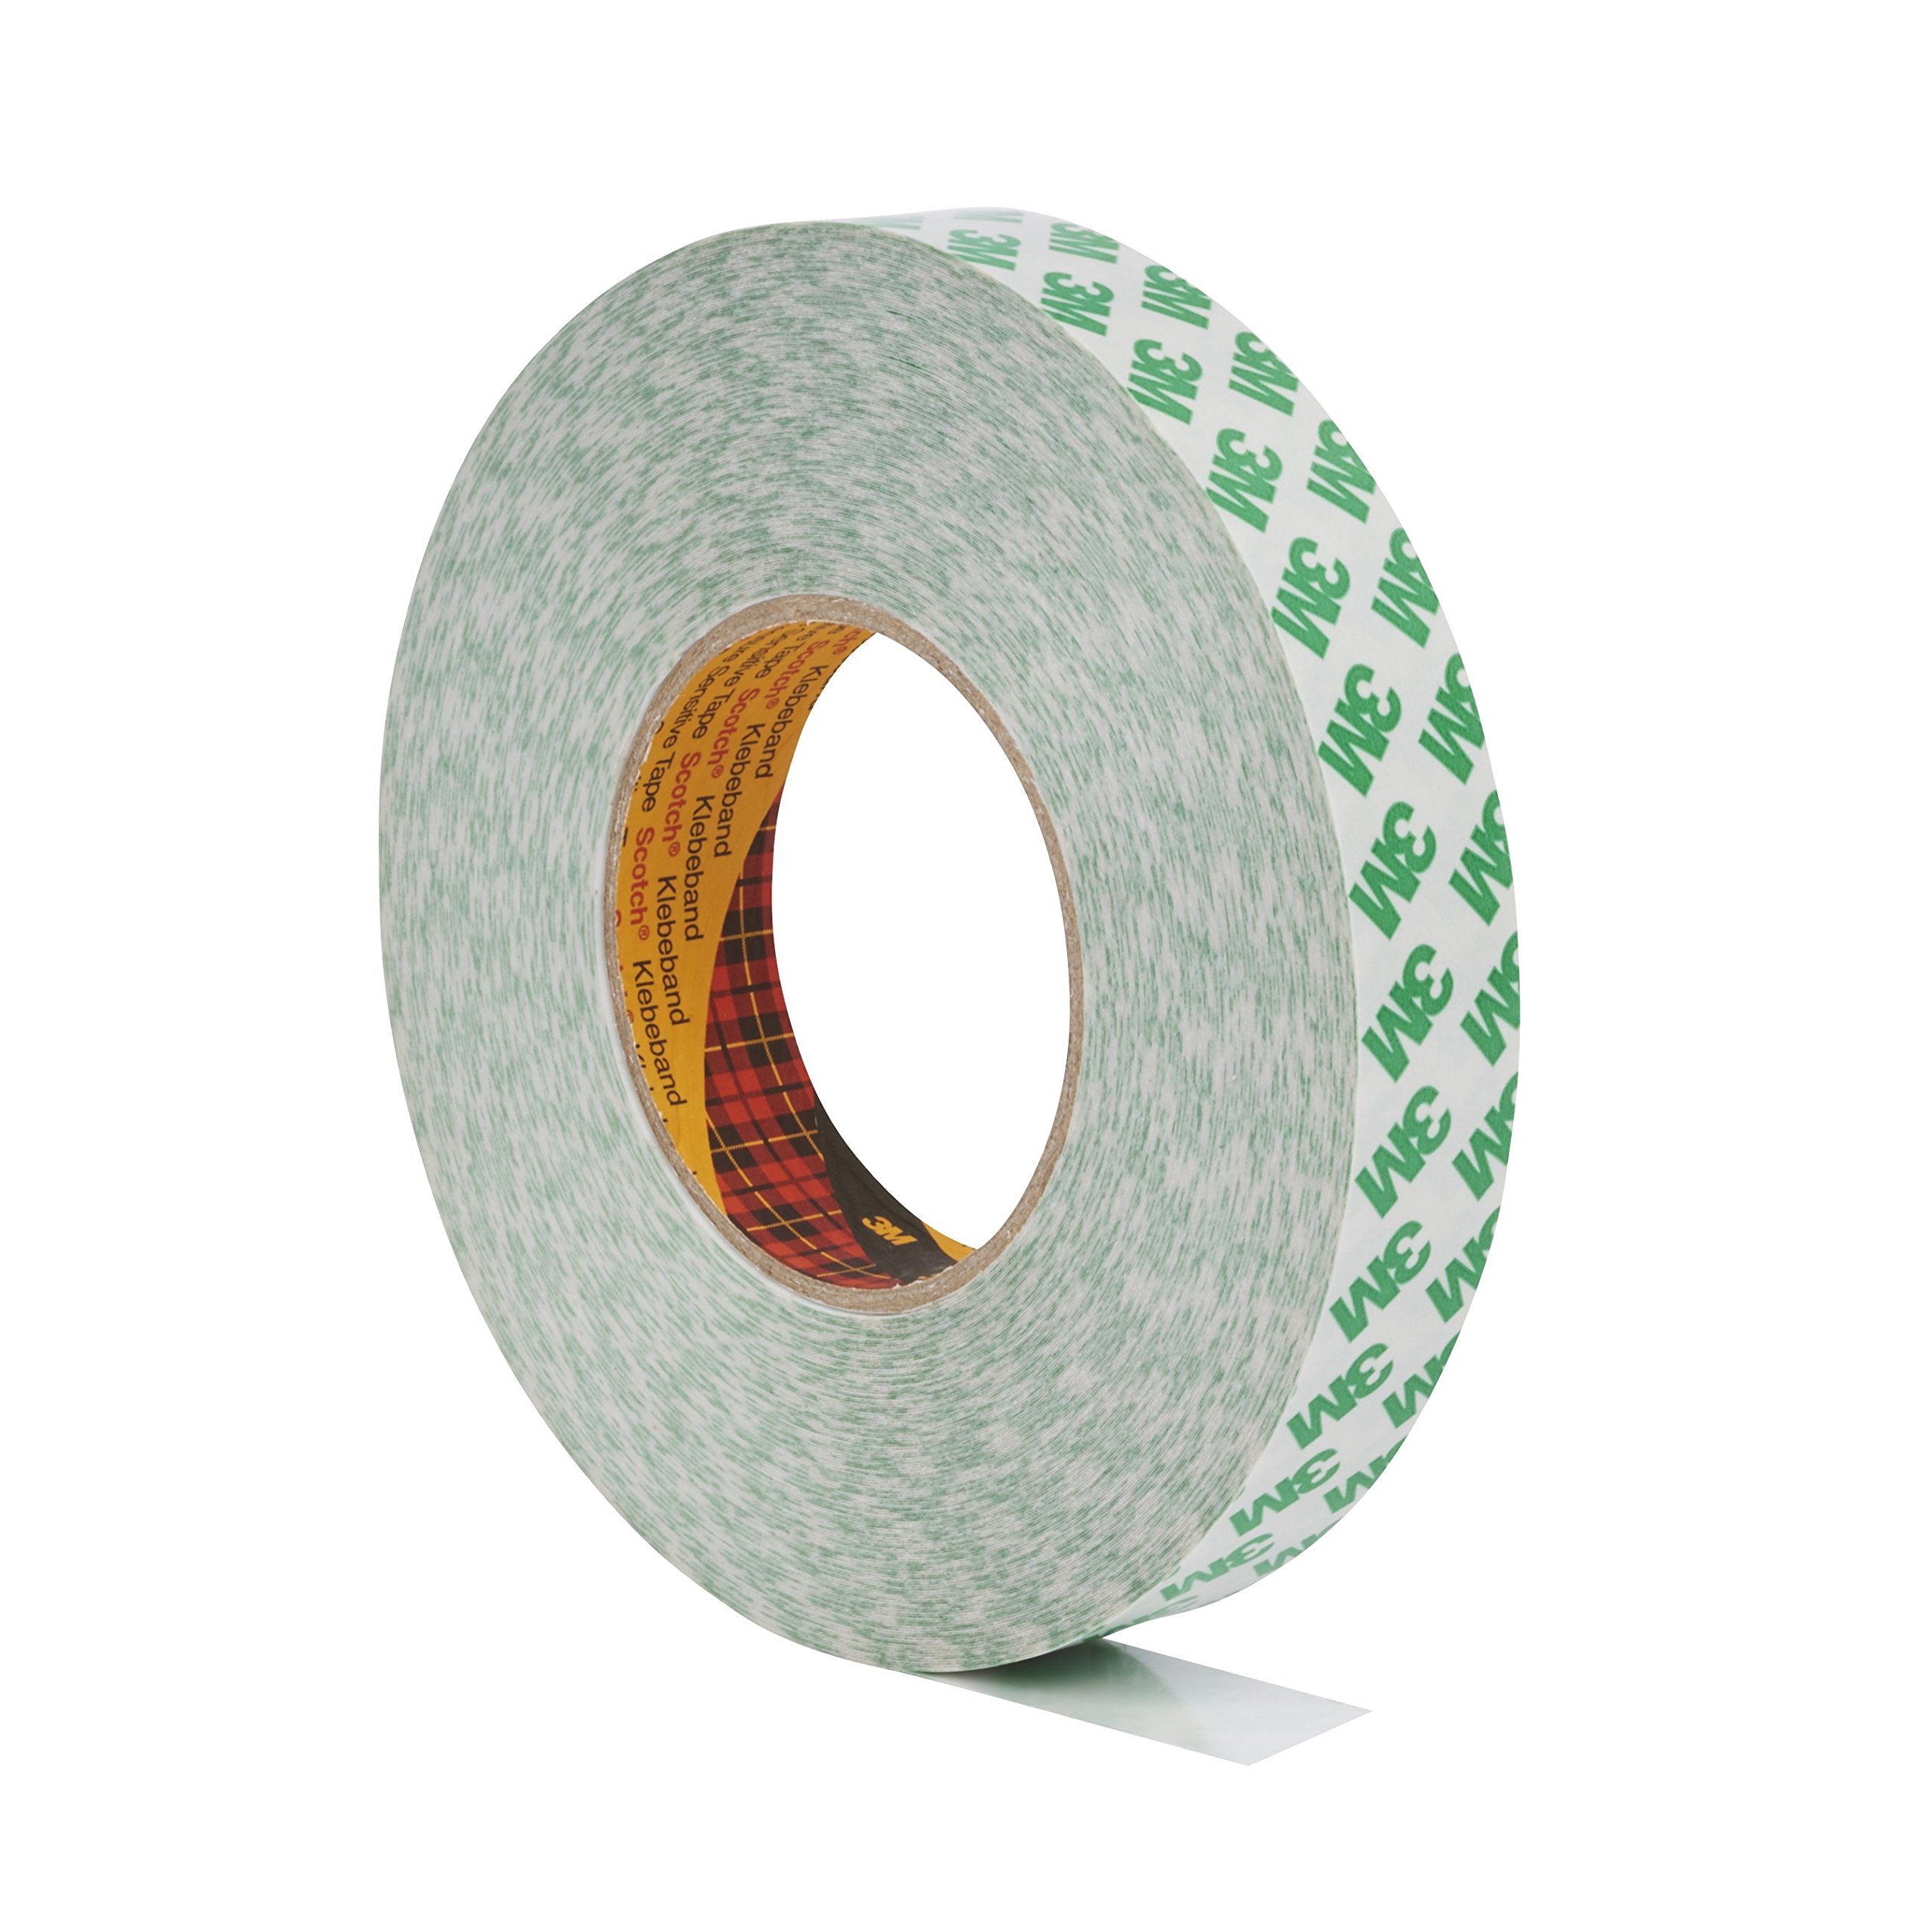 3M™ 9087 Double Coated Tape 9mm x 50m